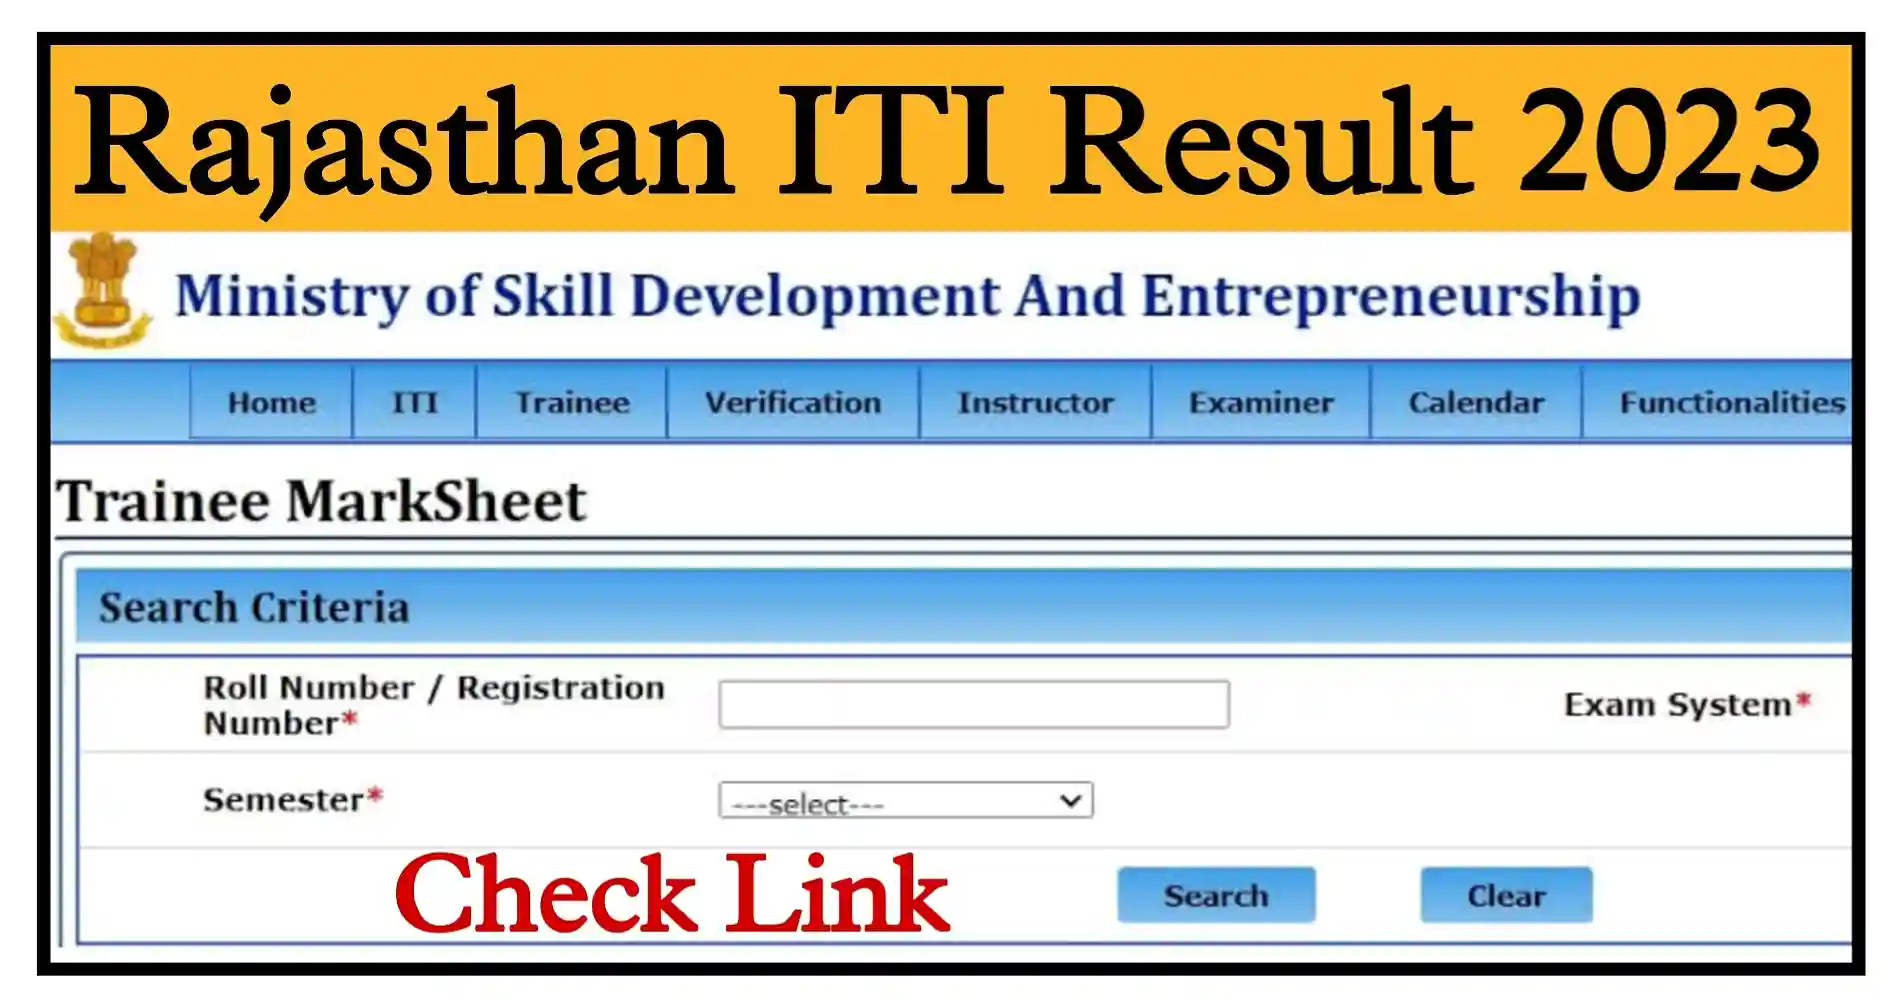 Rajasthan ITI Result 2023 NCVT MIS ITI Result 2023 1st Year And 2nd Year Check Direct Link @ncvtmis.gov.in